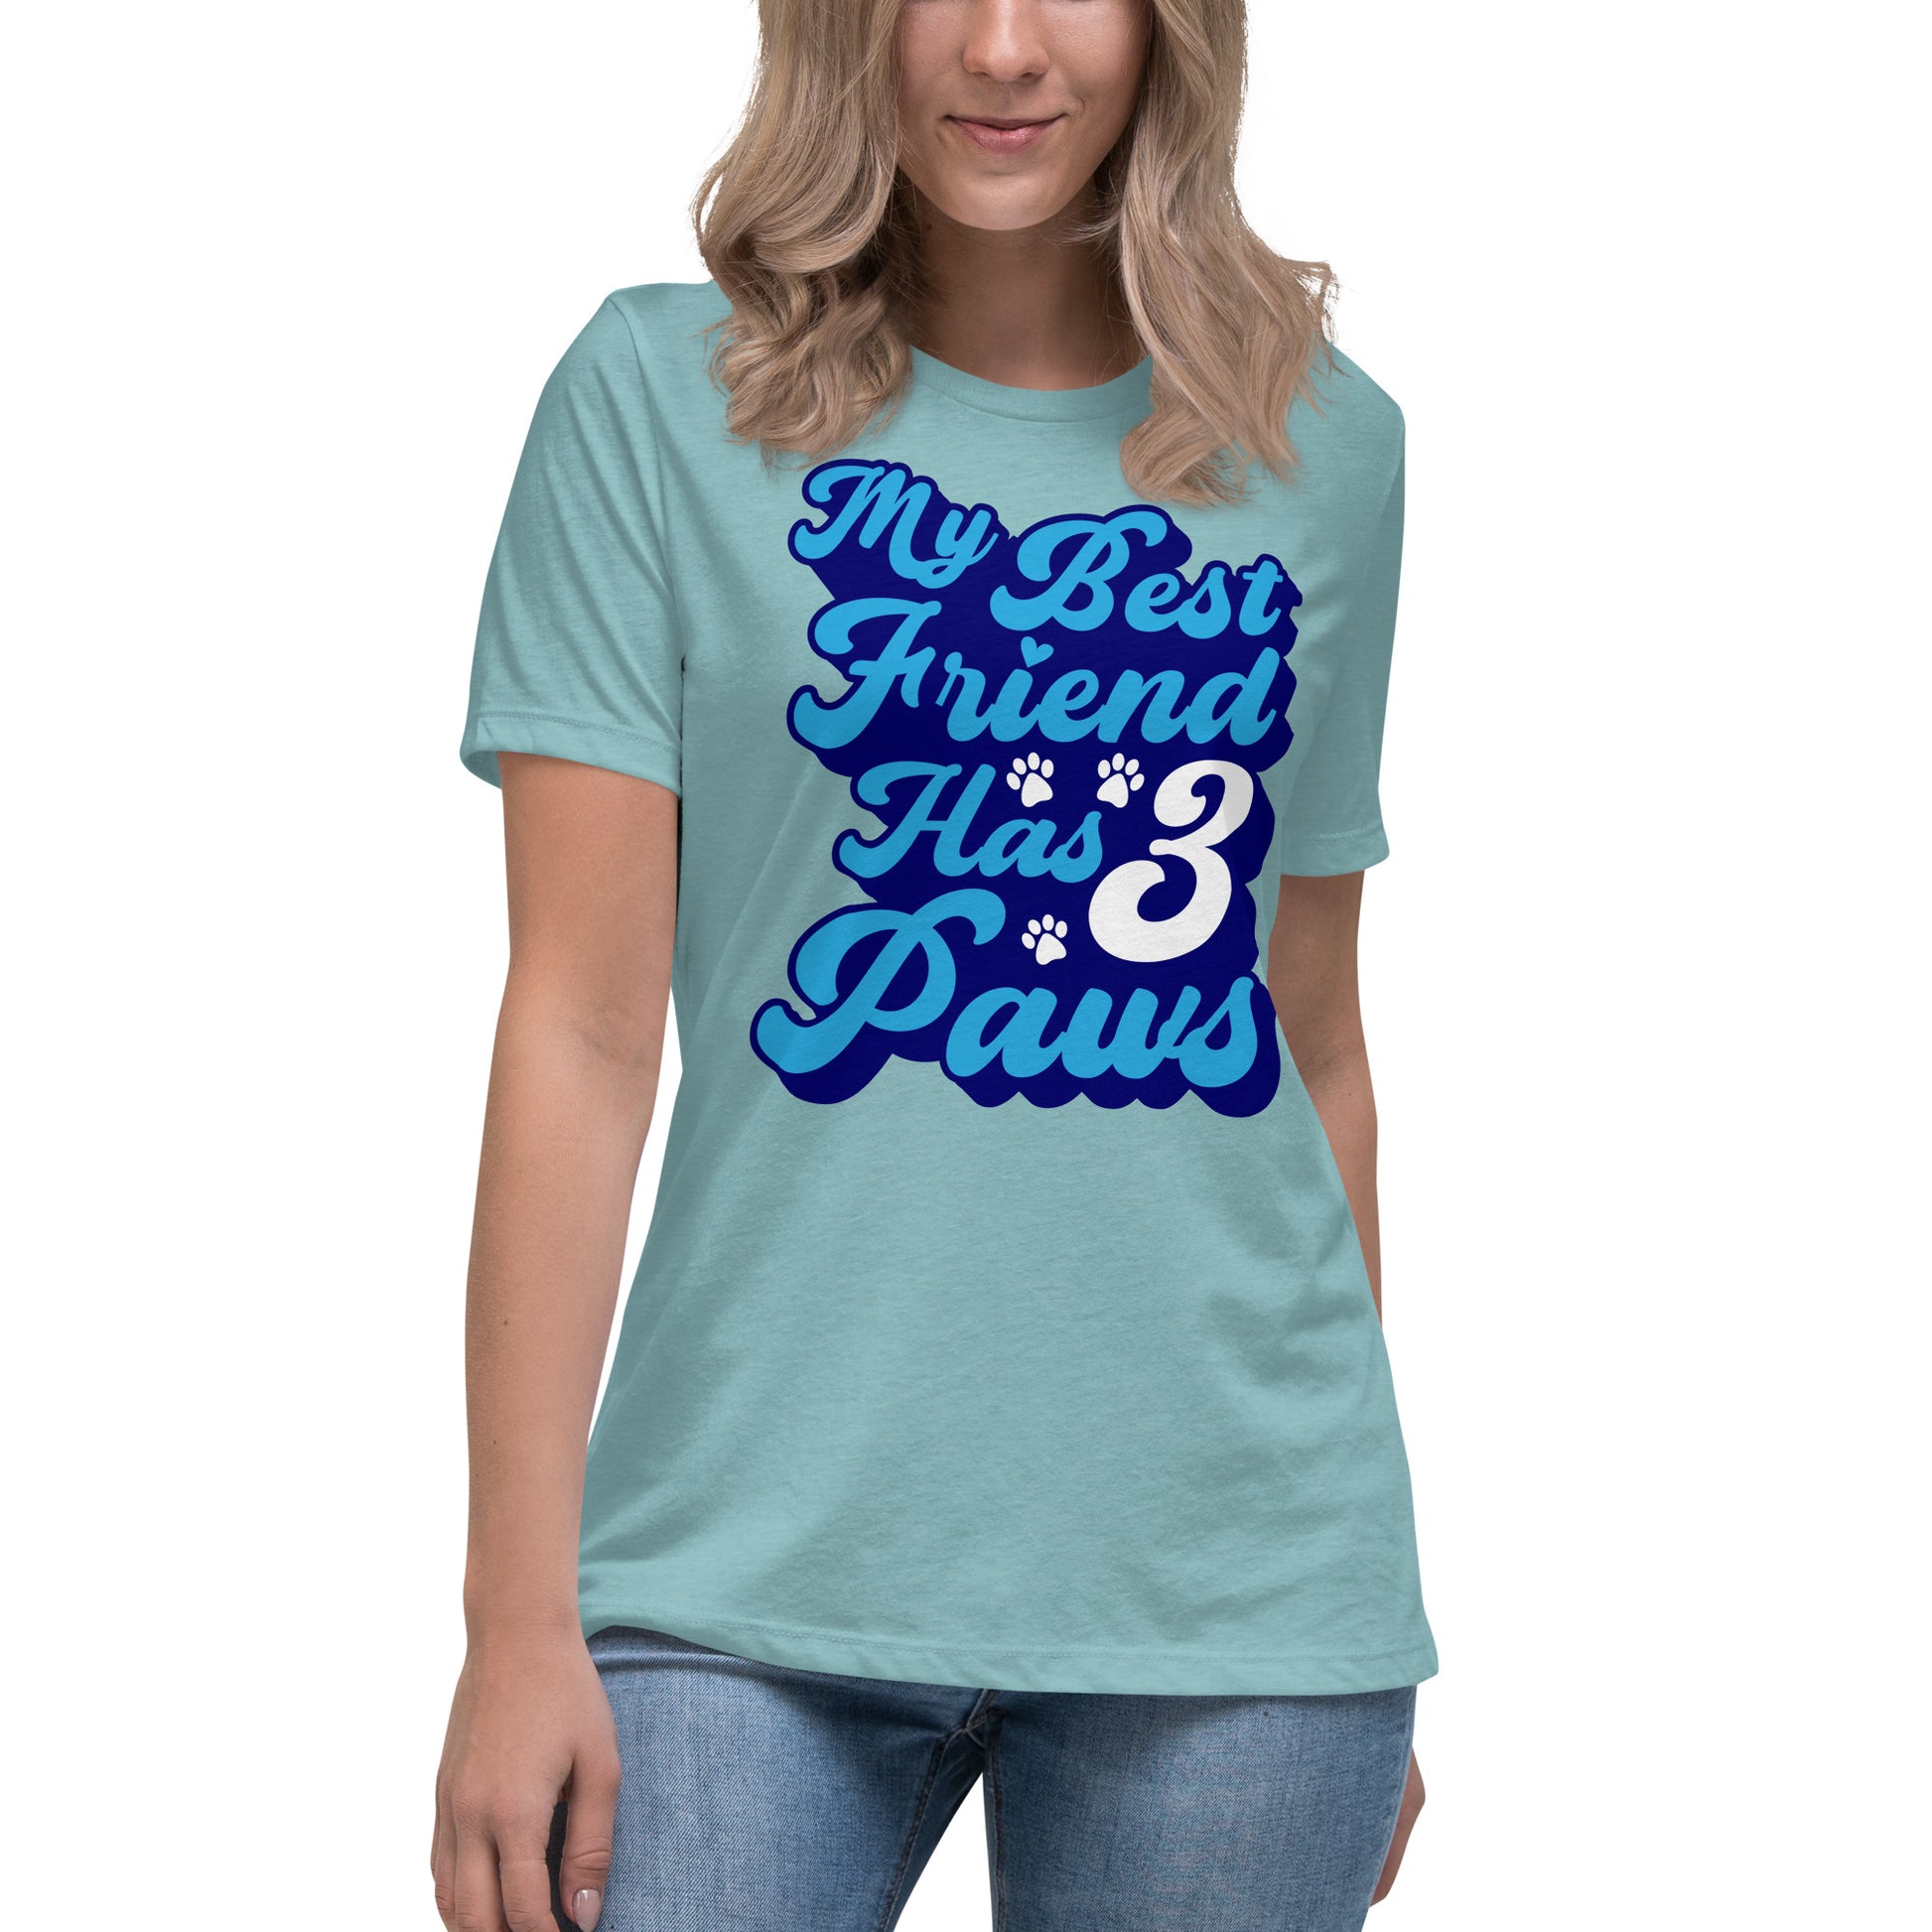 My best friend has 3 Paws women’s relaxed fit t-shirts by Dog Artistry heather blue lagoon color